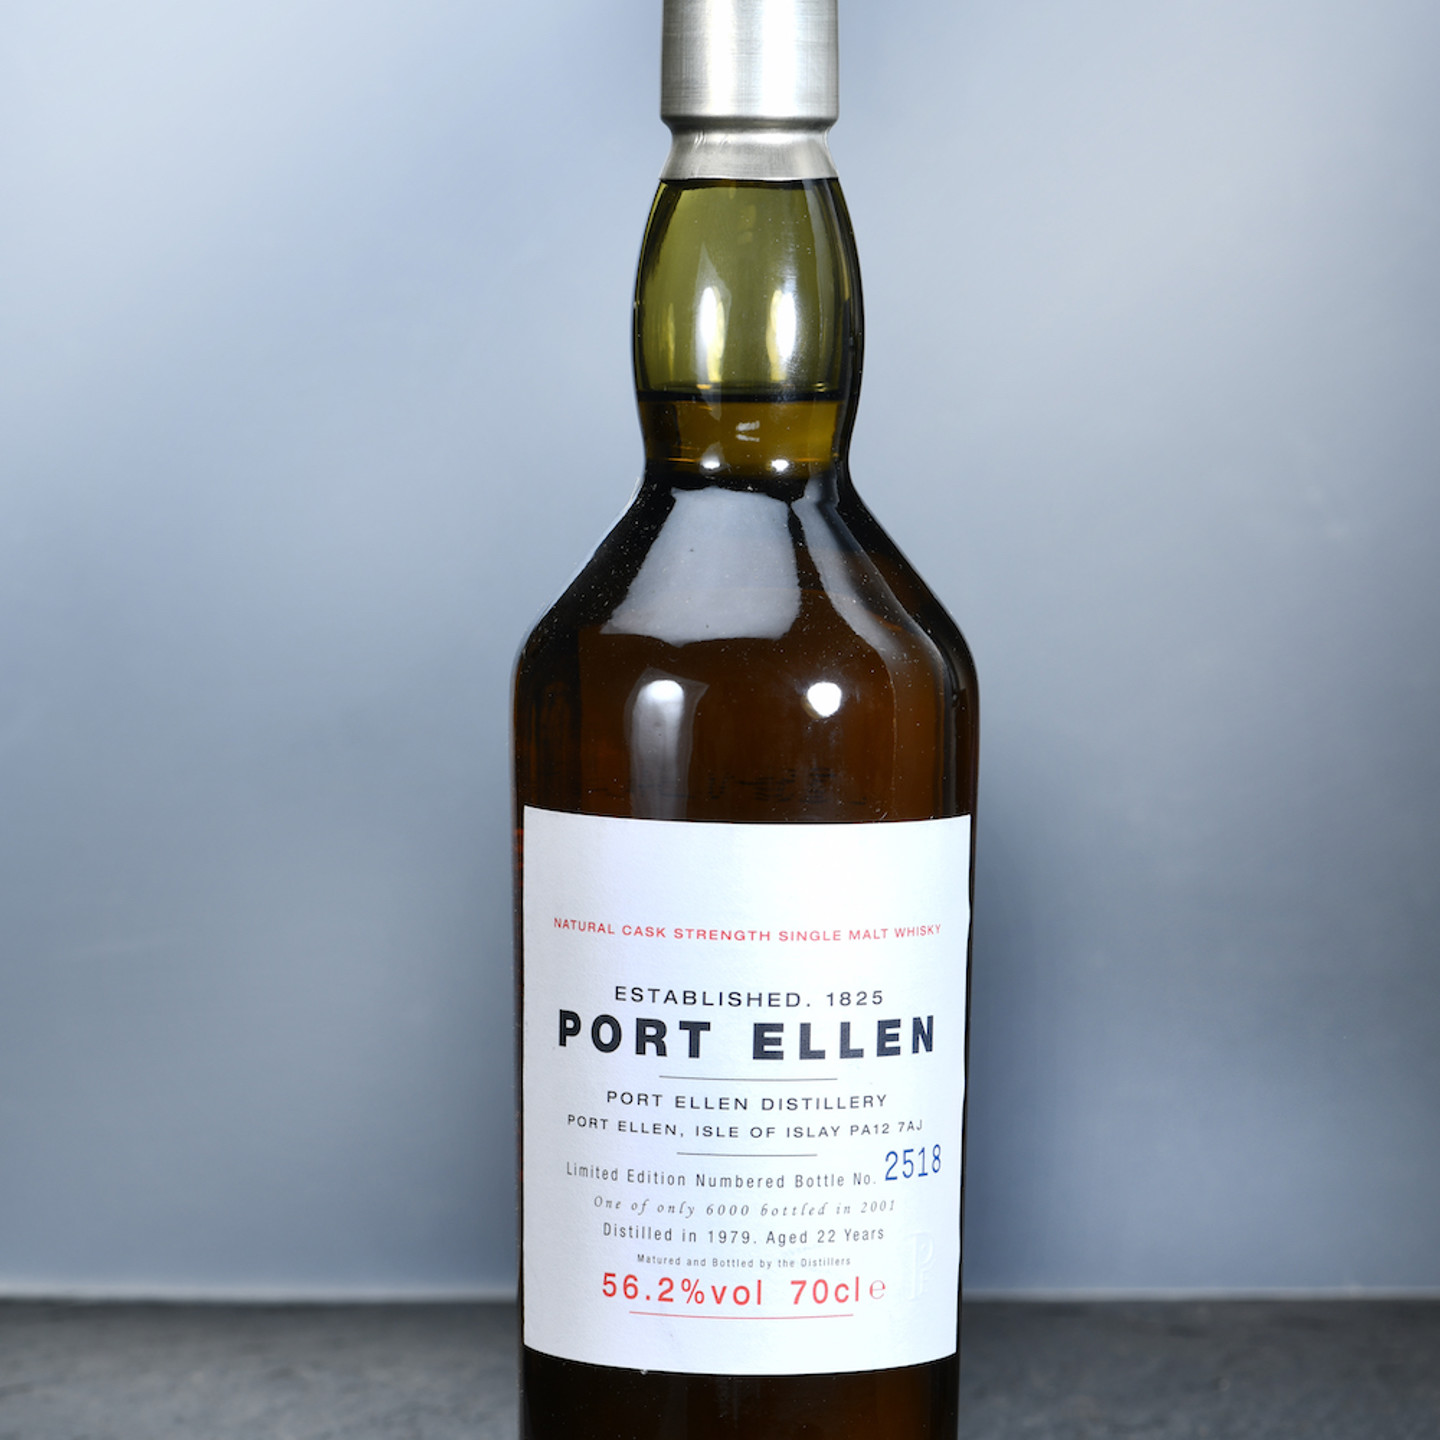 Port Ellen Distillery Isle Of Islay 2001 Annual Release 22 Year Old Natural Cask Strength Single Malt Whisky, Sold For Ś1900